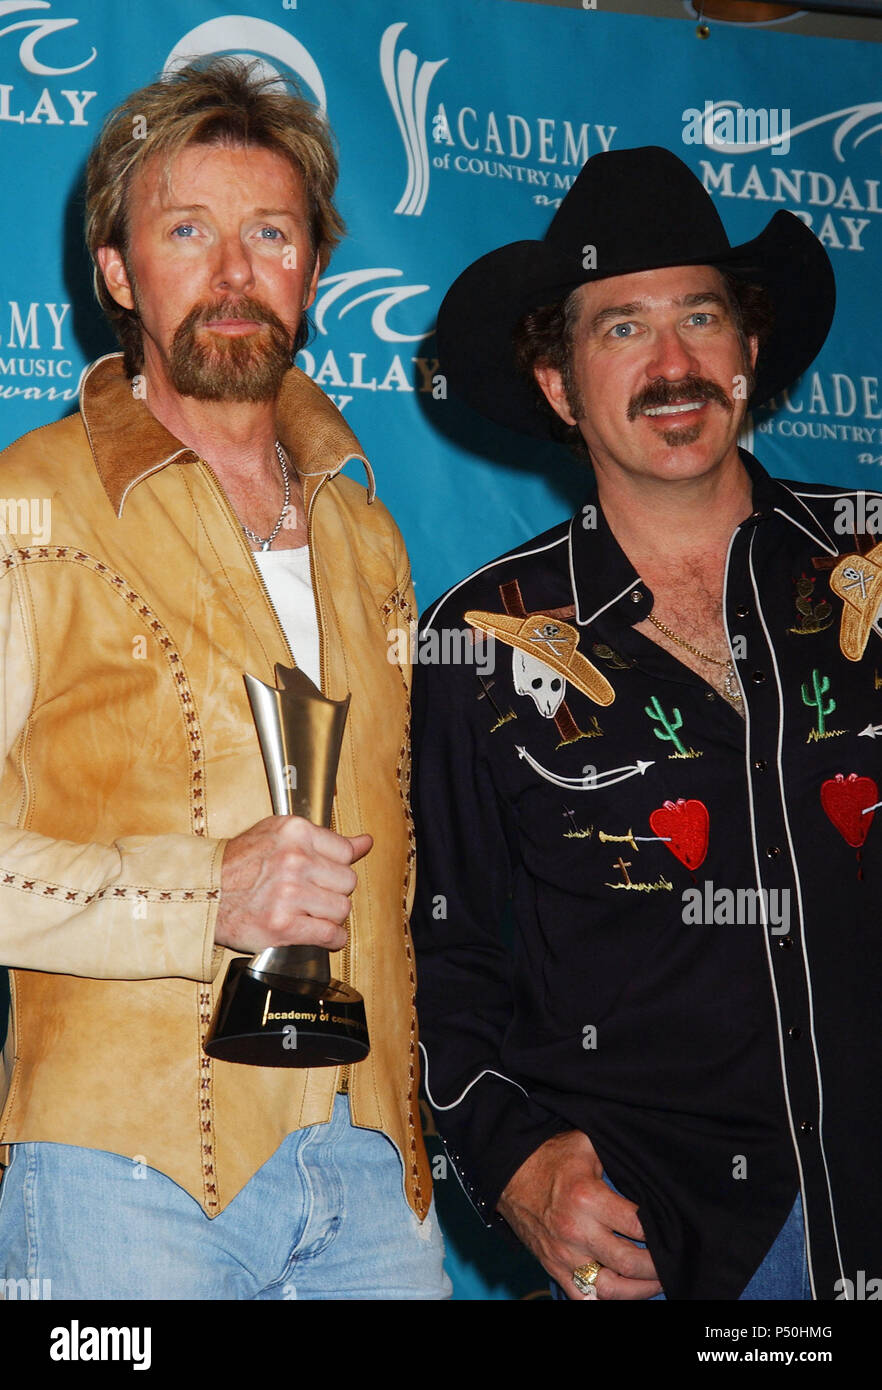 Brooks & Dunn at The 40th Annual Academy of Country Music Awards (ACM) held at Mandalay Bay Resort & Casino in Las Vegas. May 17, 2005          -            08 Brooks Dunn 369.jpg08 Brooks Dunn 369  Event in Hollywood Life - California, Red Carpet Event, USA, Film Industry, Celebrities, Photography, Bestof, Arts Culture and Entertainment, Topix Celebrities fashion, Best of, Hollywood Life, Event in Hollywood Life - California,  backstage trophy, Awards show, movie celebrities, TV celebrities, Music celebrities, Topix, Bestof, Arts Culture and Entertainment, Photography,    inquiry tsuni@Gamma- Stock Photo